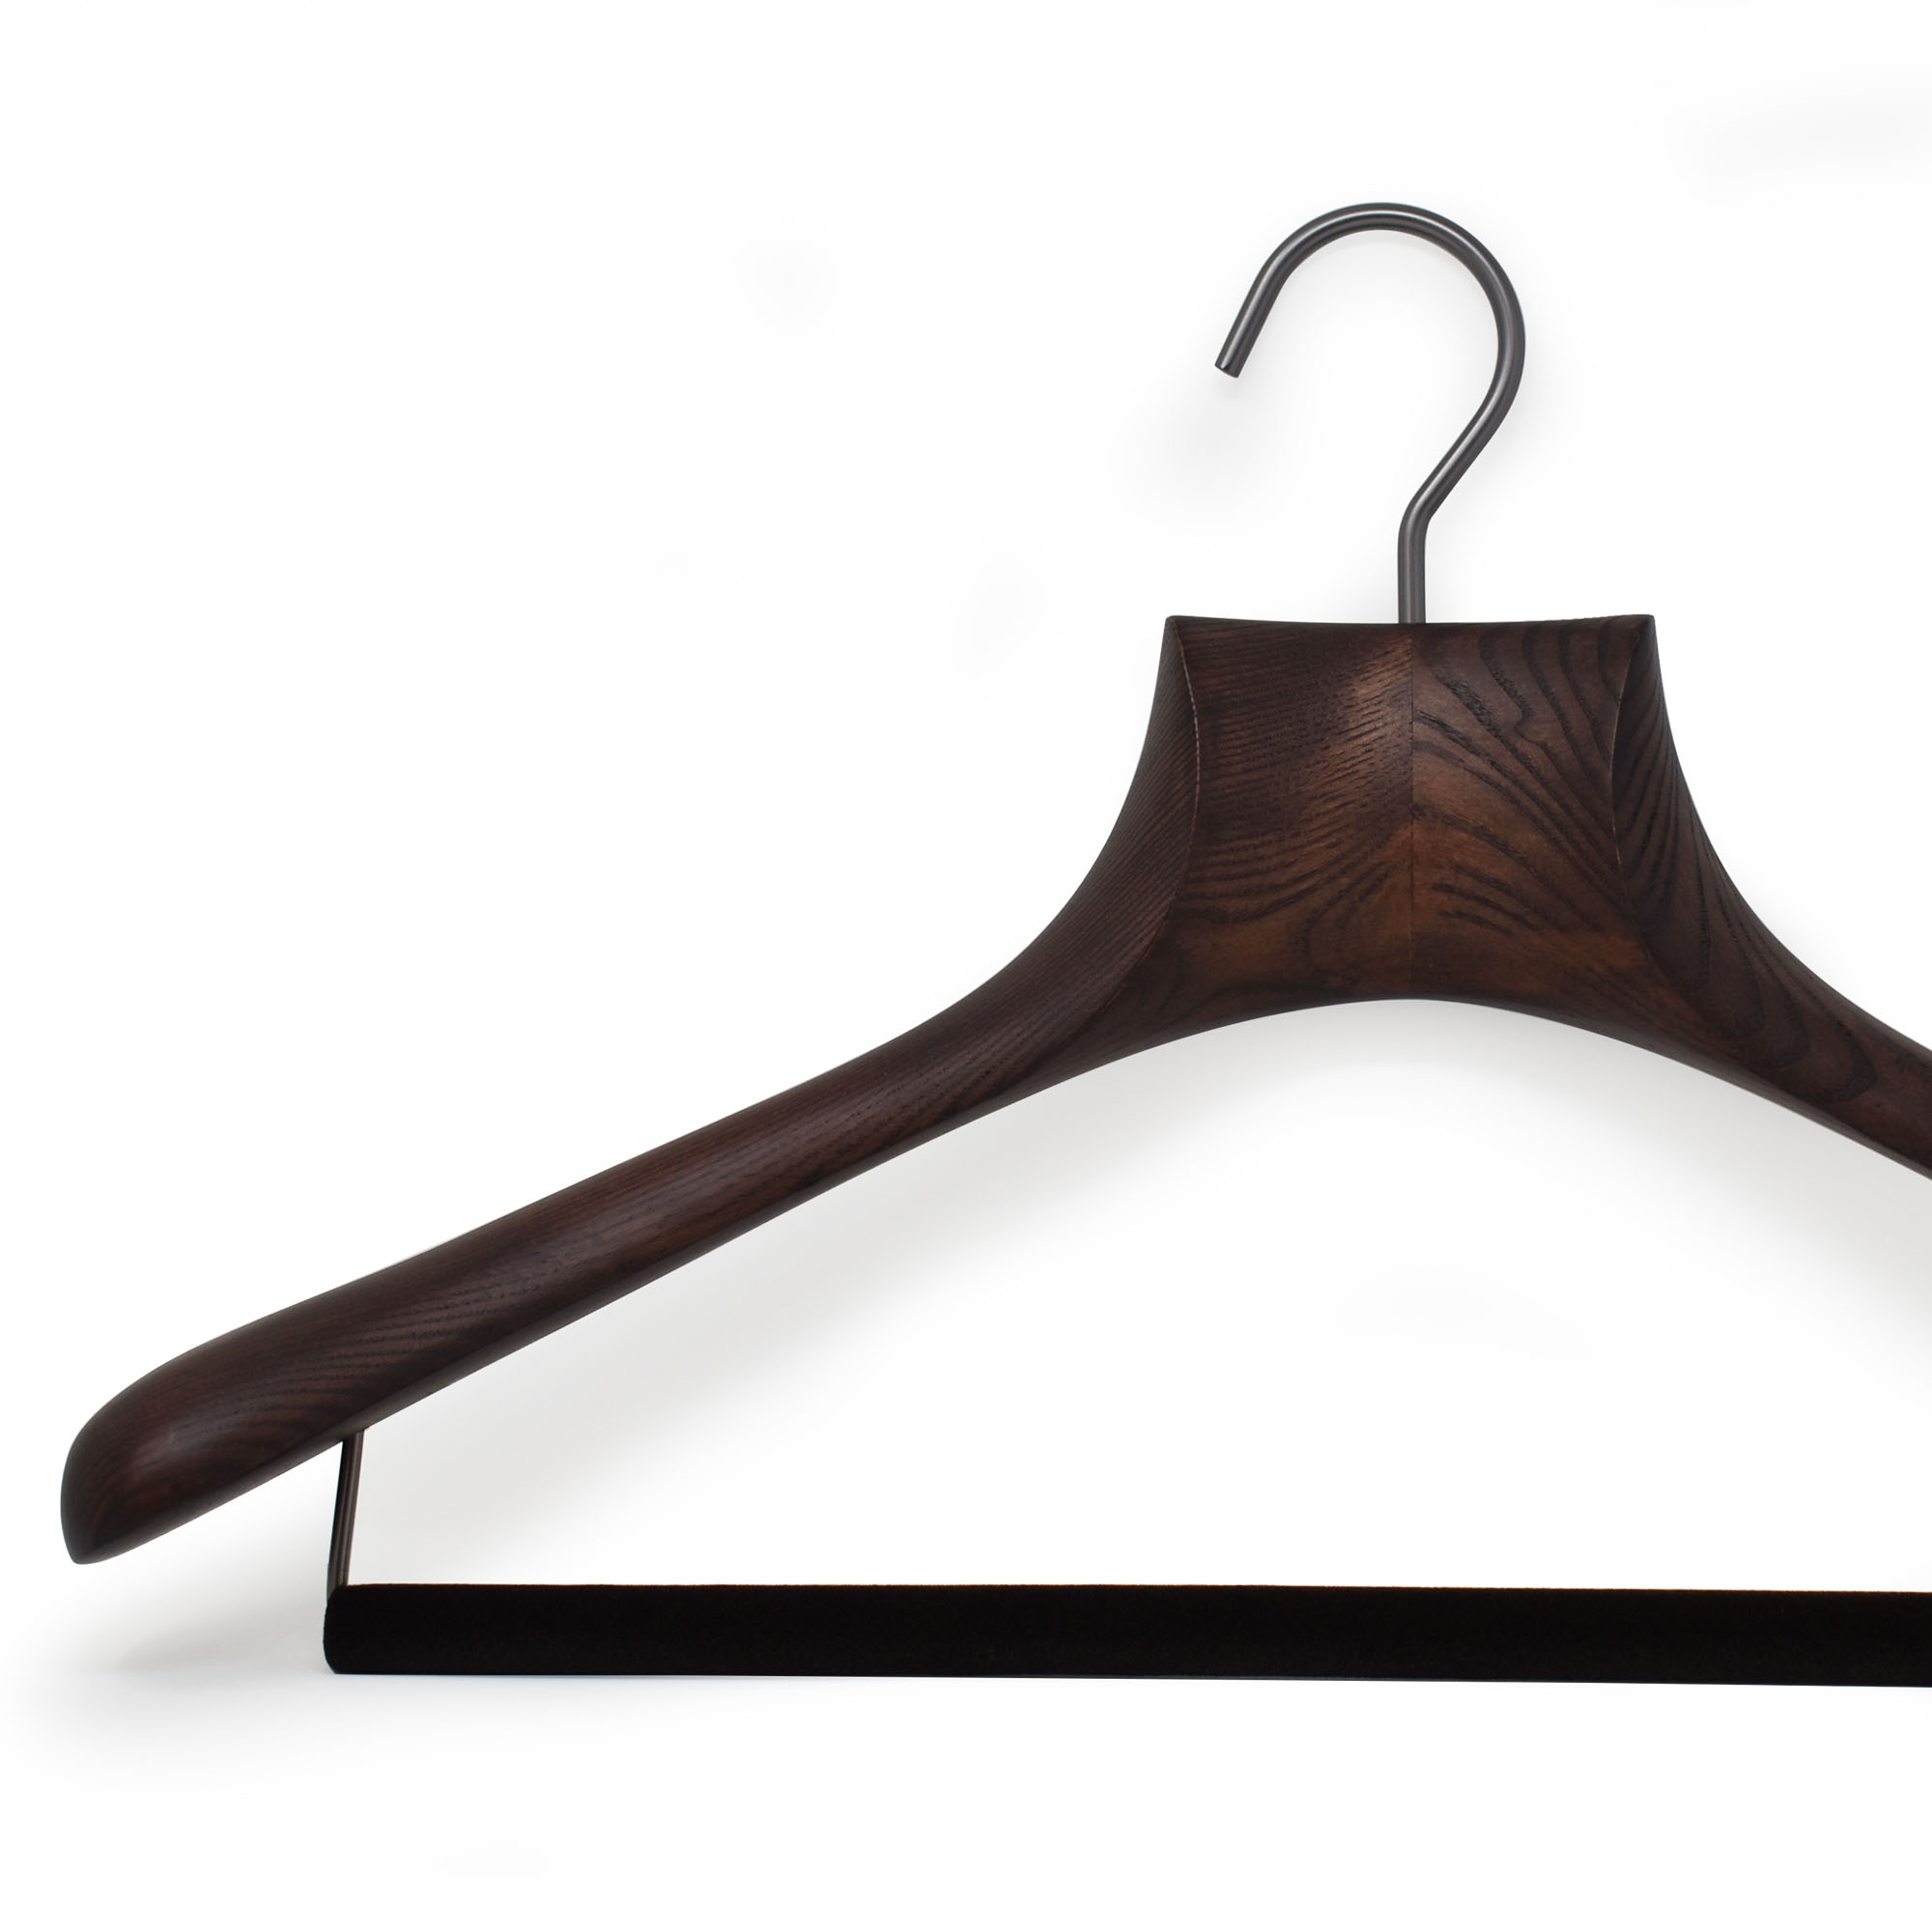 Coat and suit hanger with wide shoulders and anti-slip bar